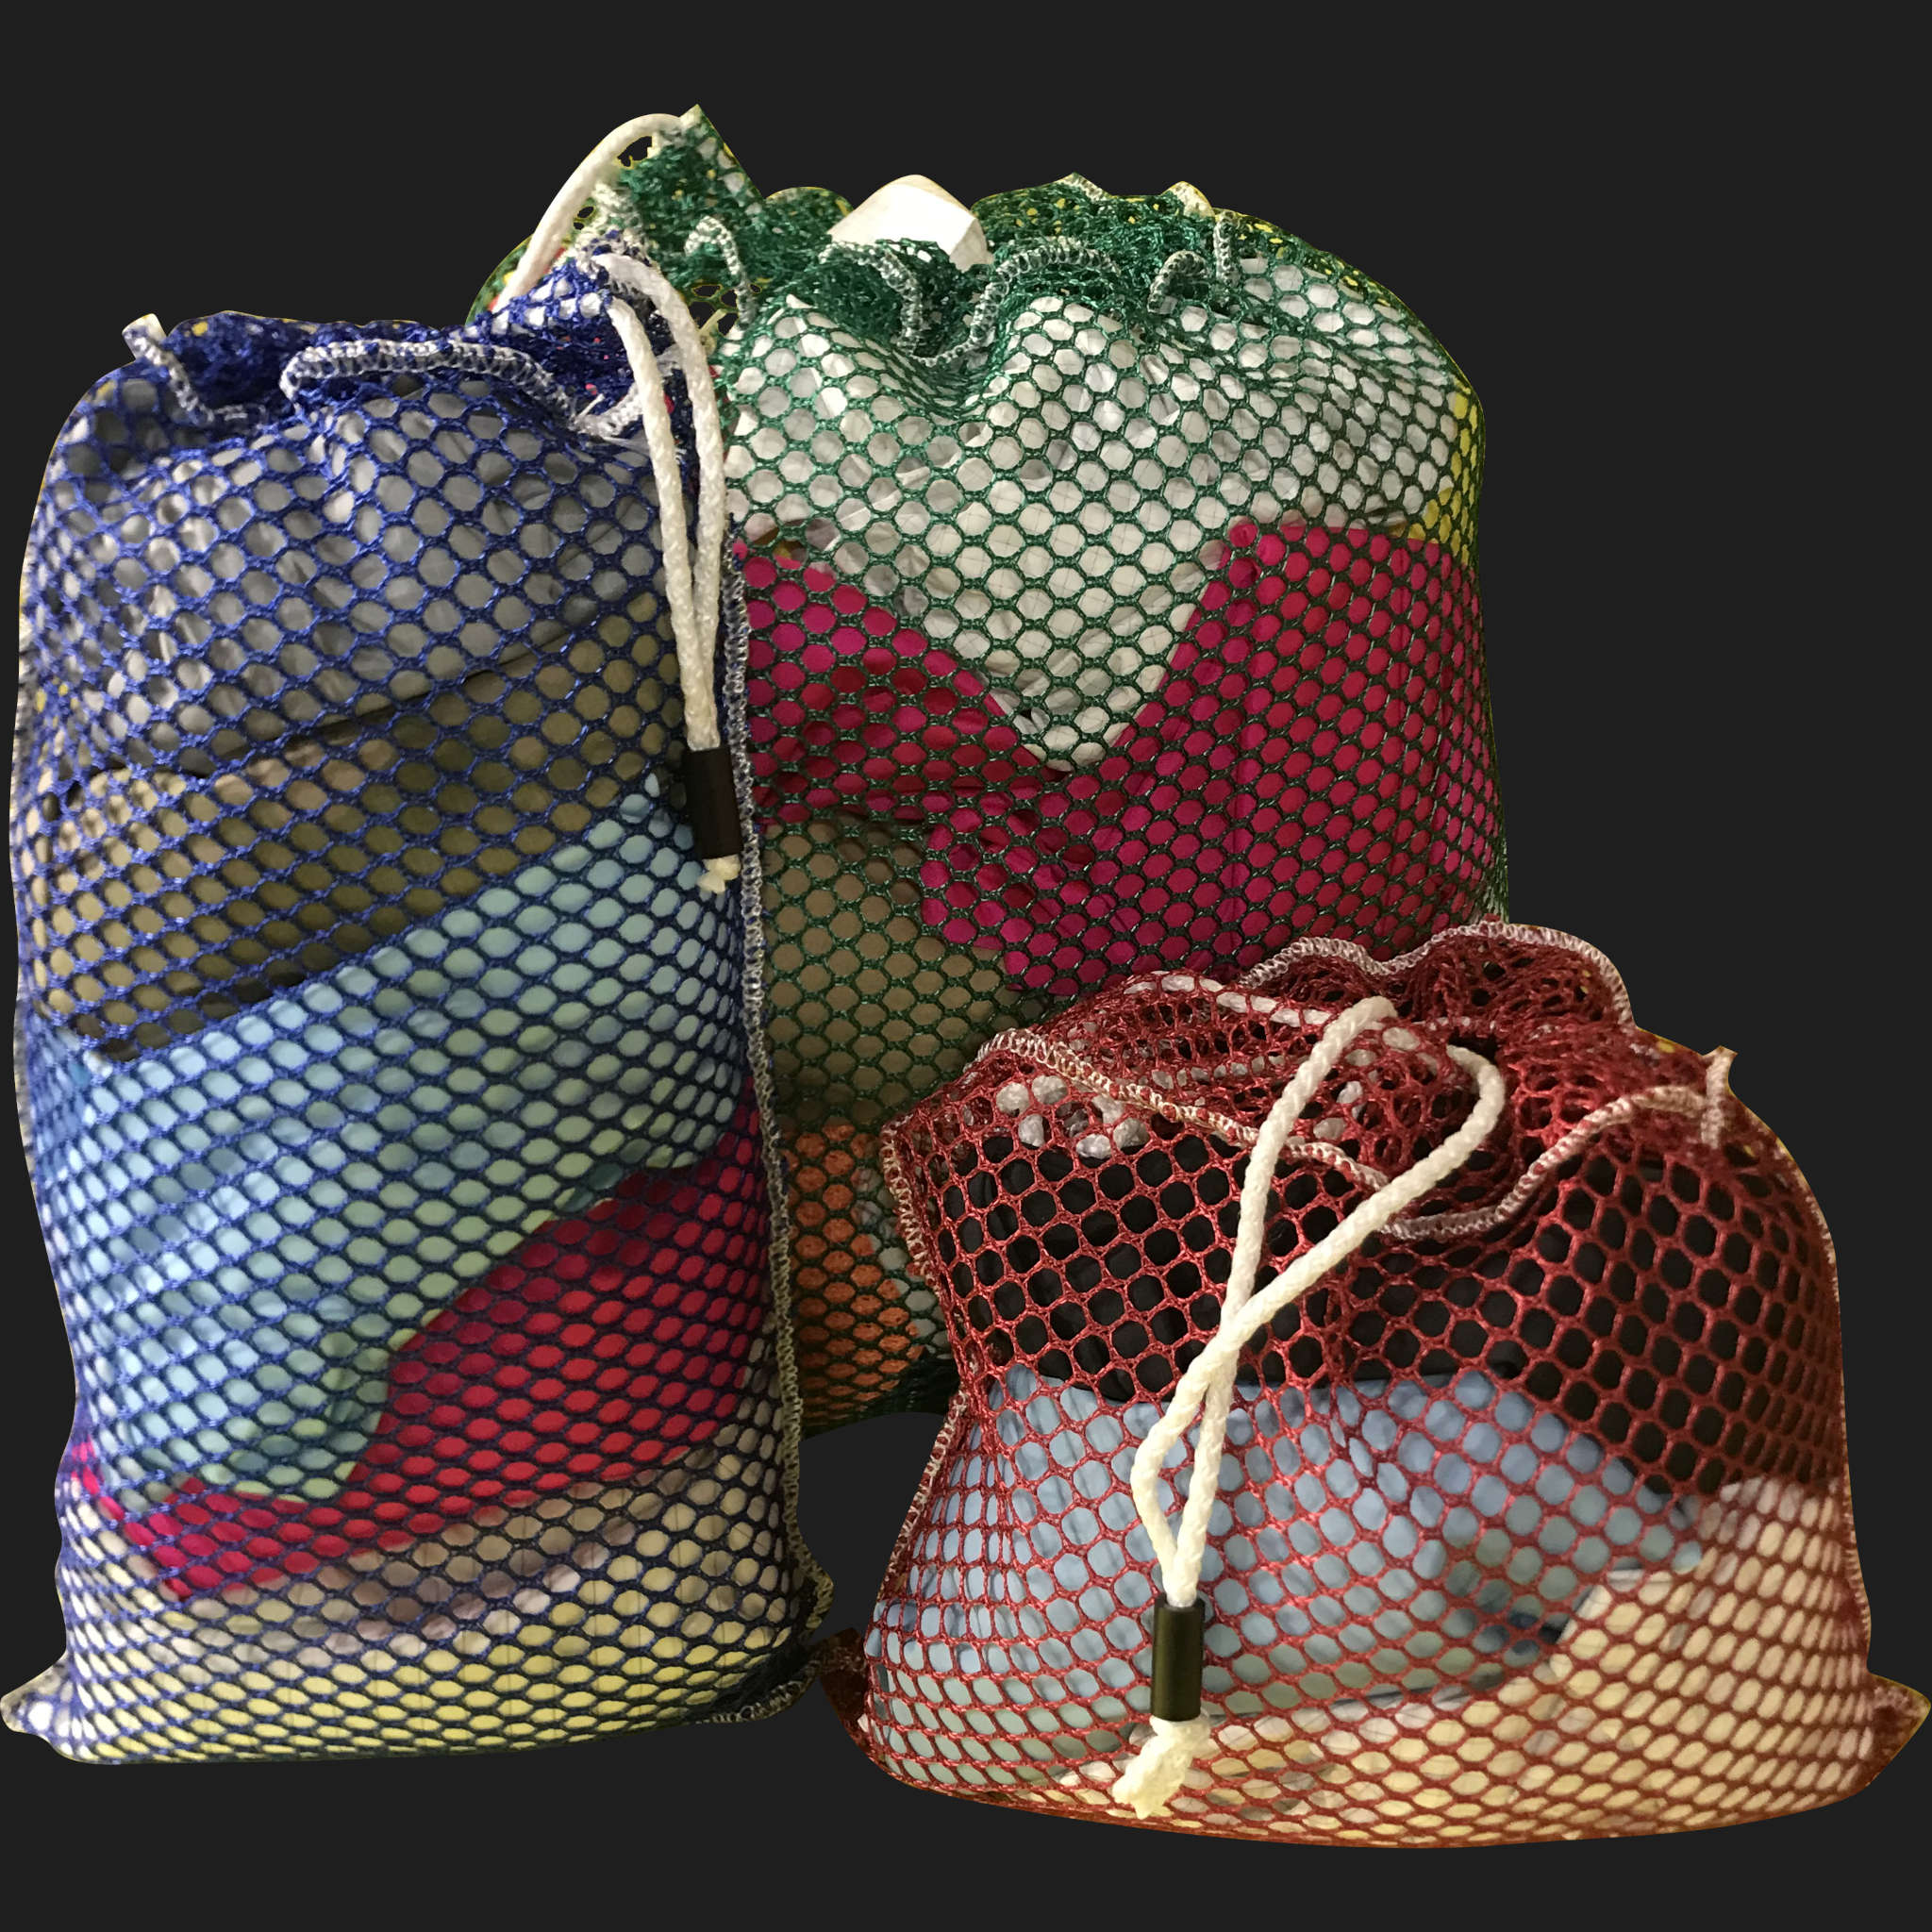 46" x 66" Customized Mesh-Net-Laundry Bags Heavy Duty with Cord and barrellock closure